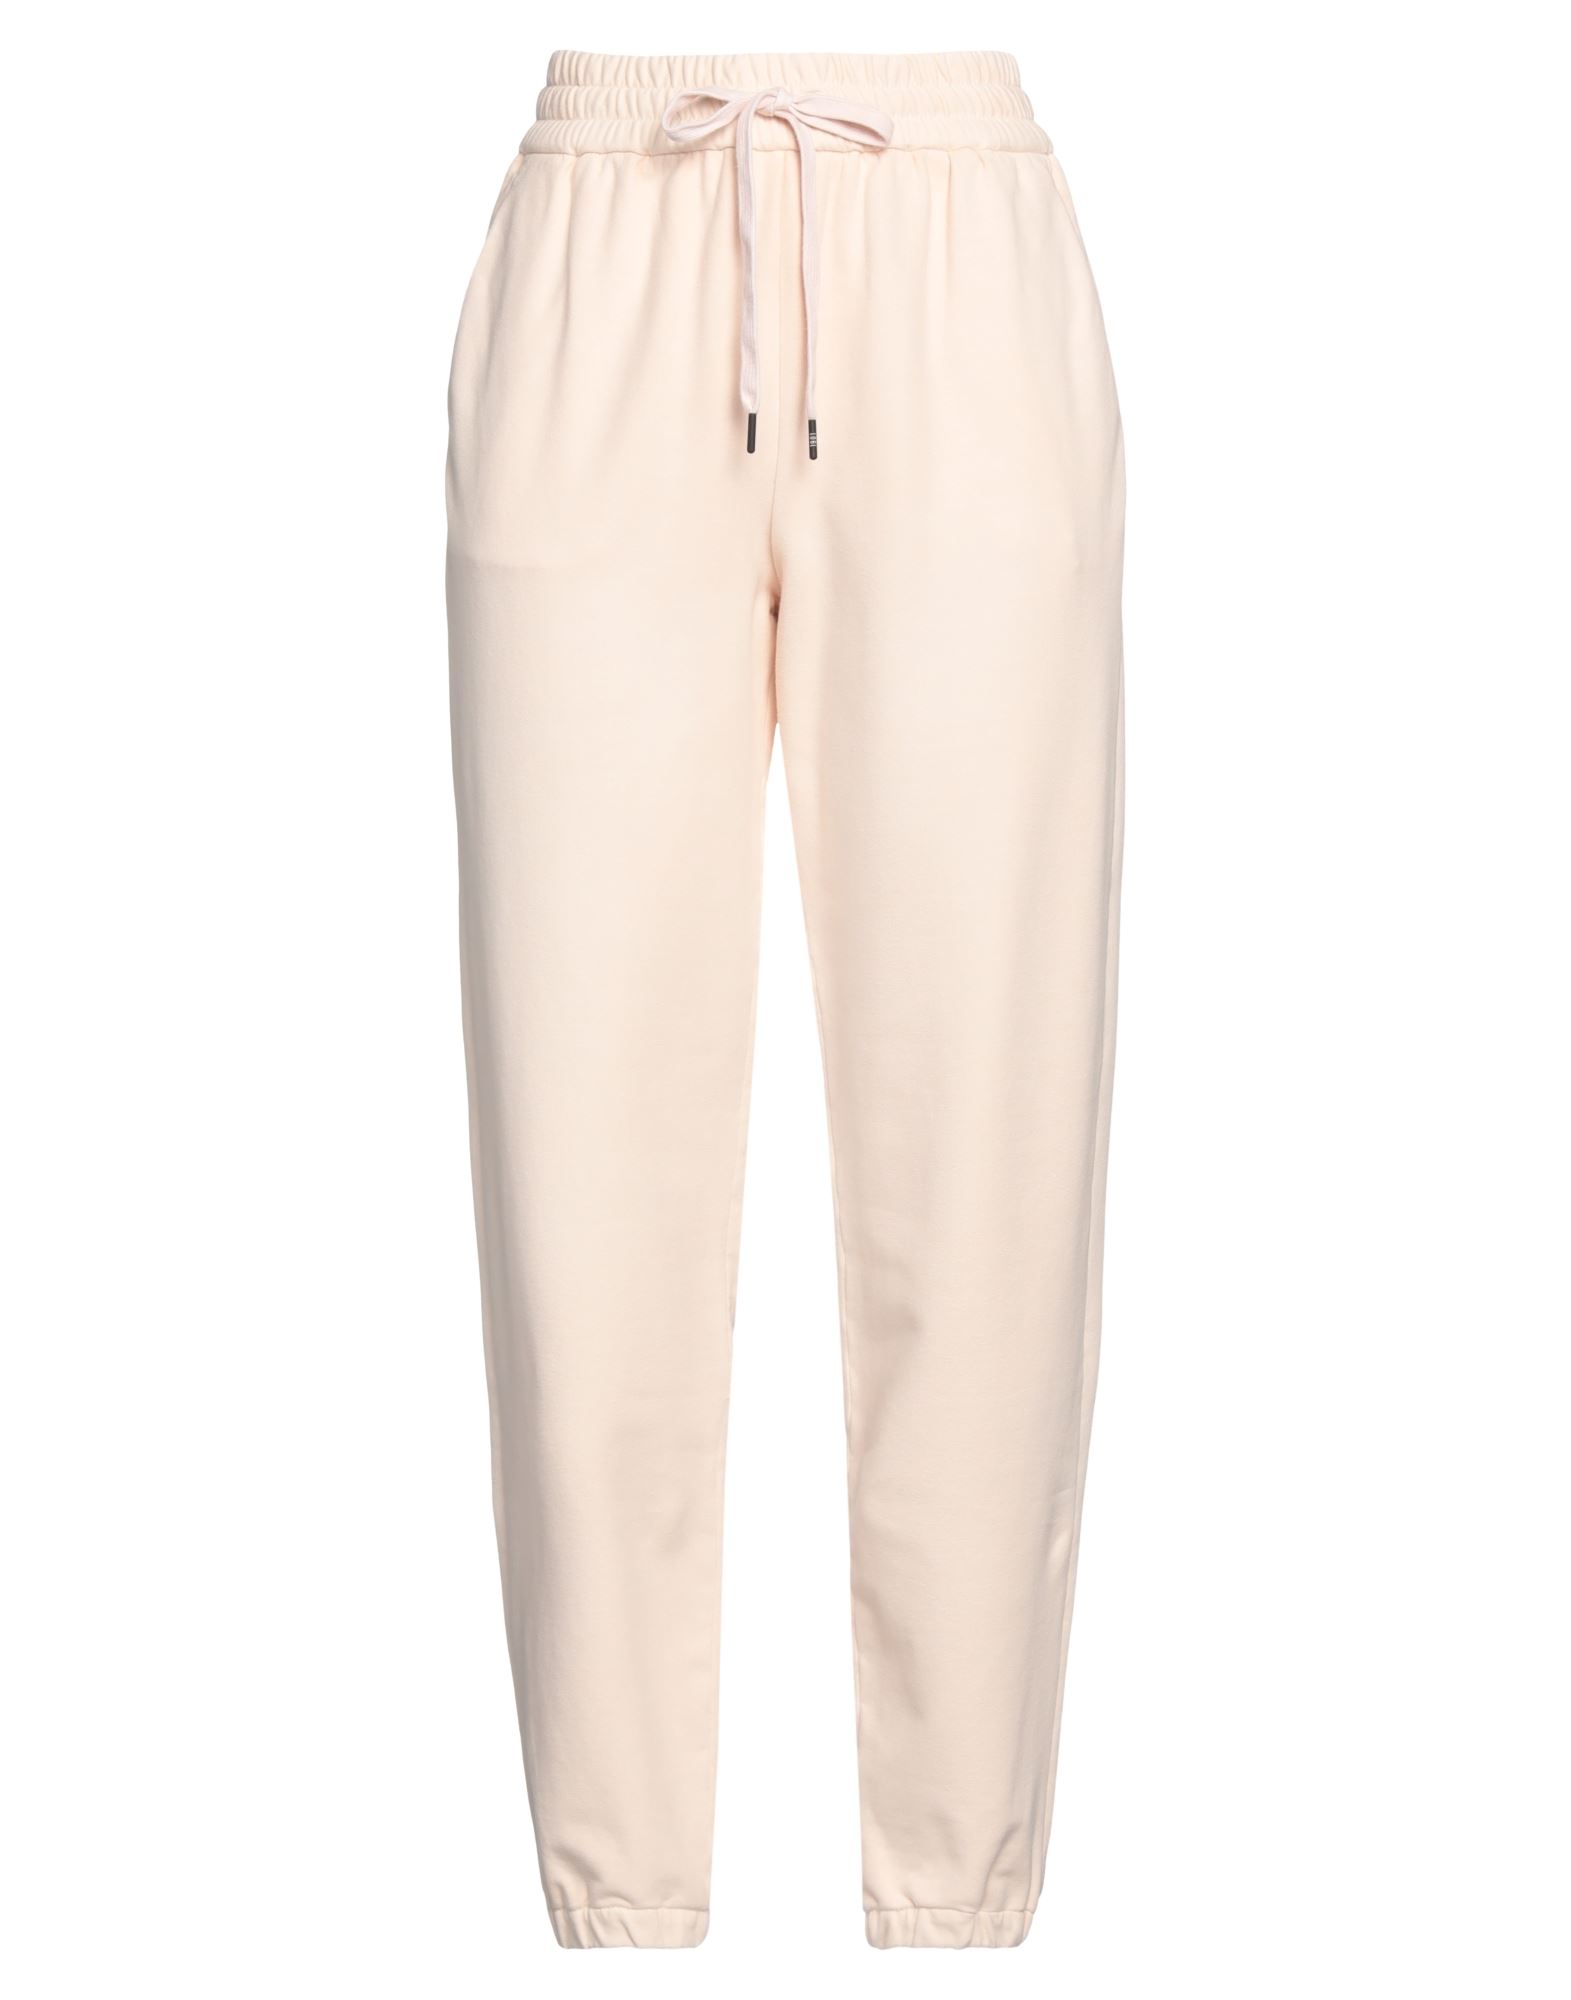 Circolo 1901 Pants In Light Pink